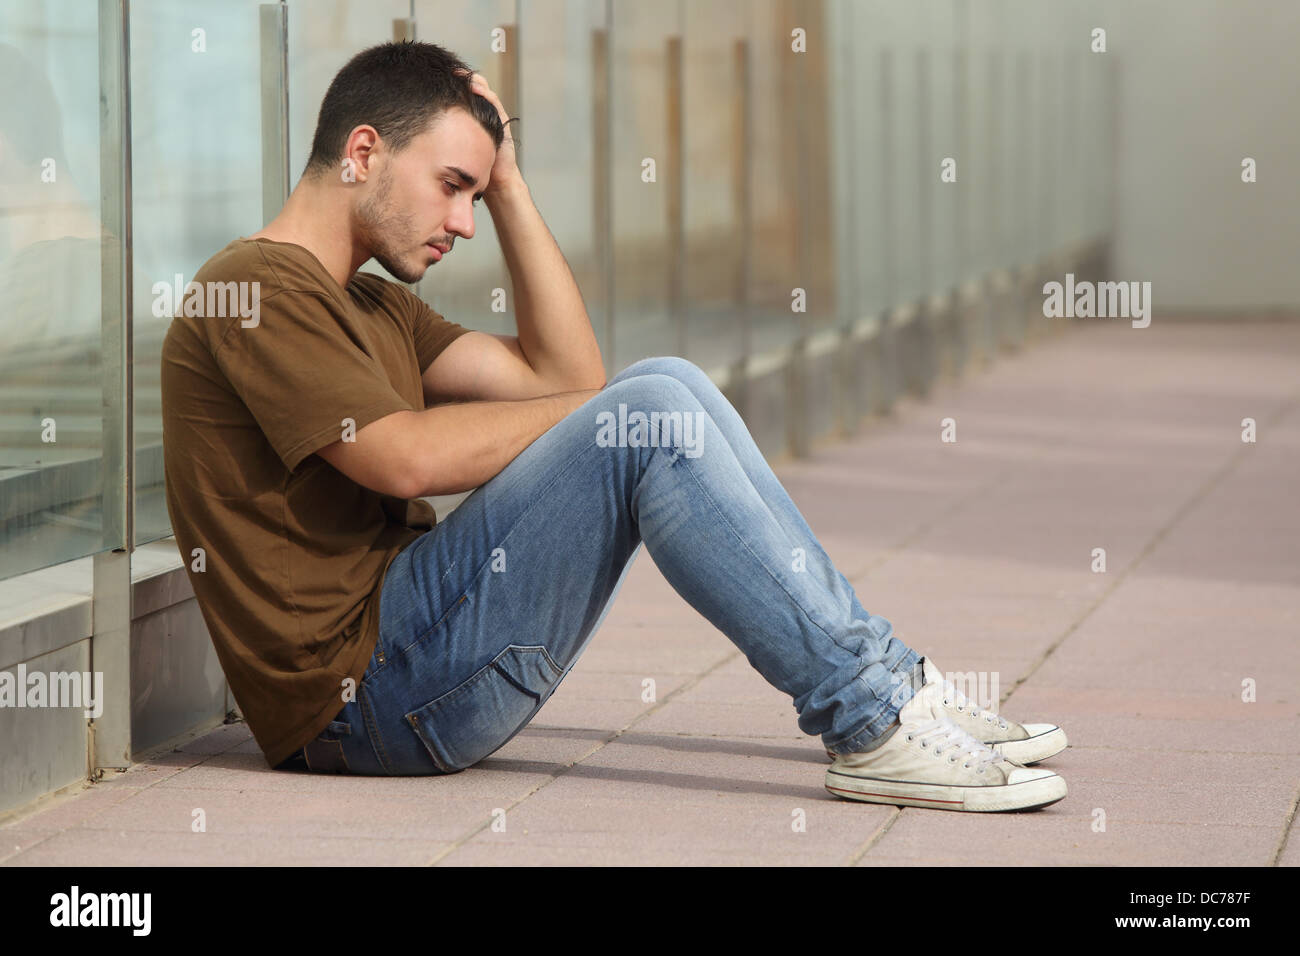 Teenager boy worried sitting on the floor with a hand on the head Stock Photo